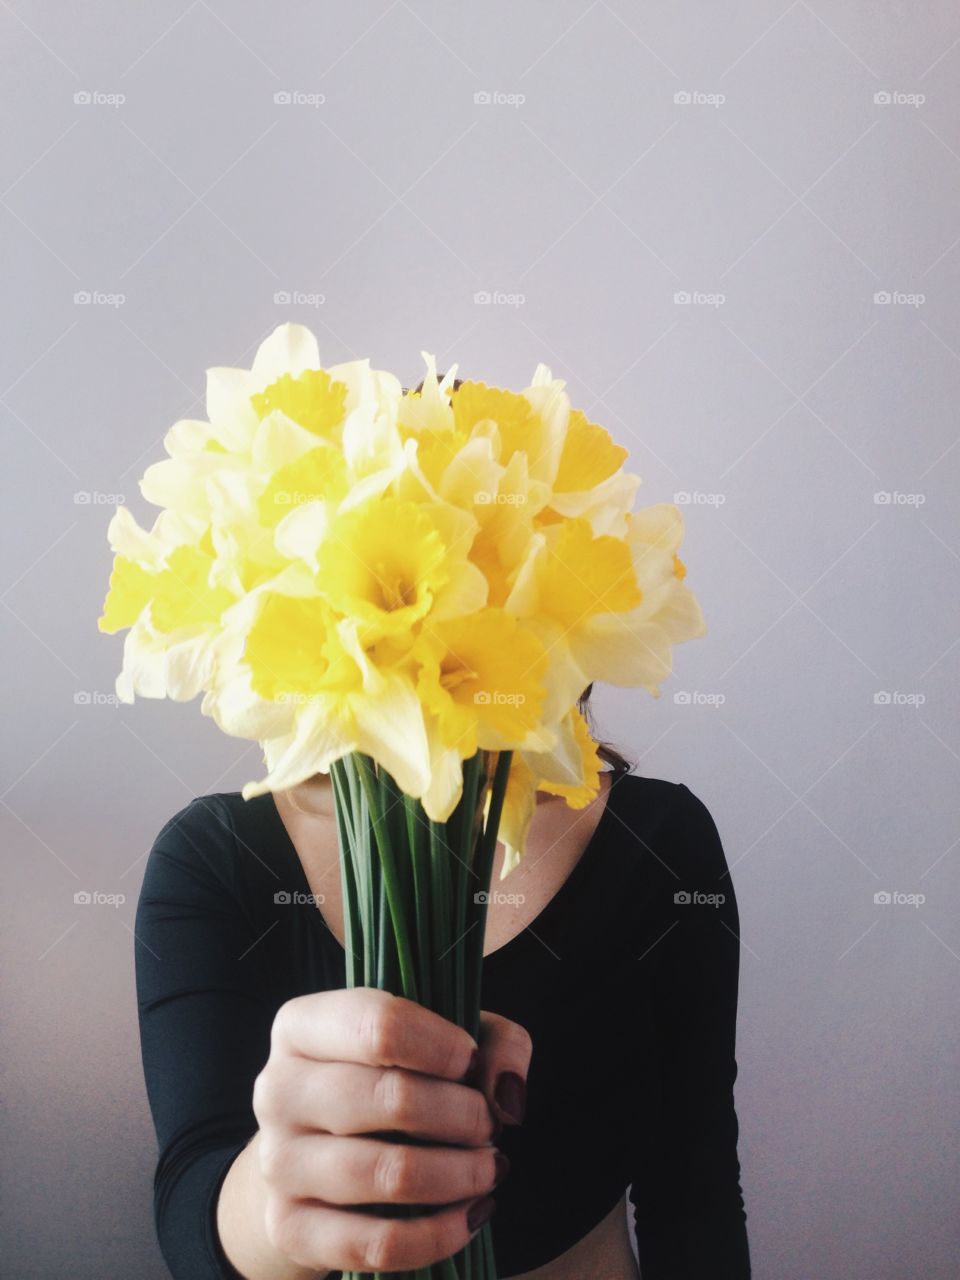 A person holding yellow flower bunch